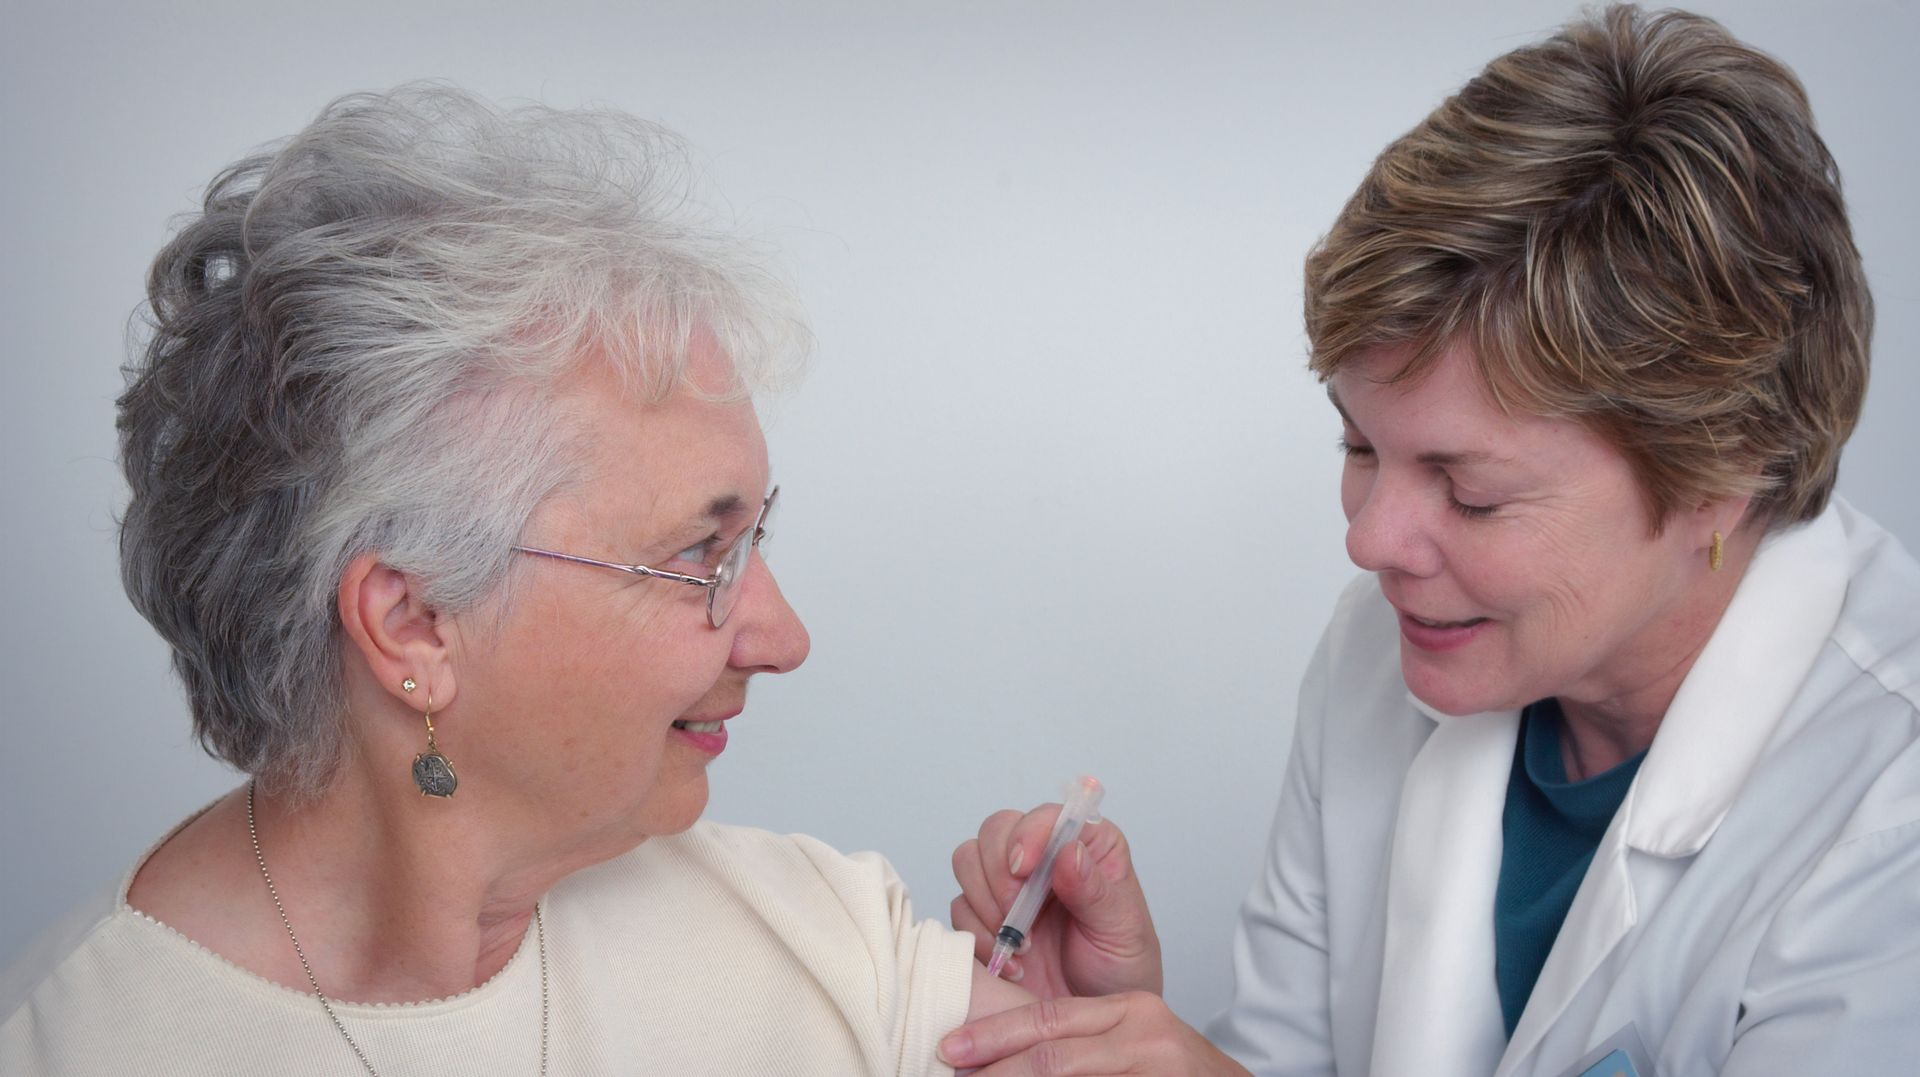 Have you had a Shingles vaccination?